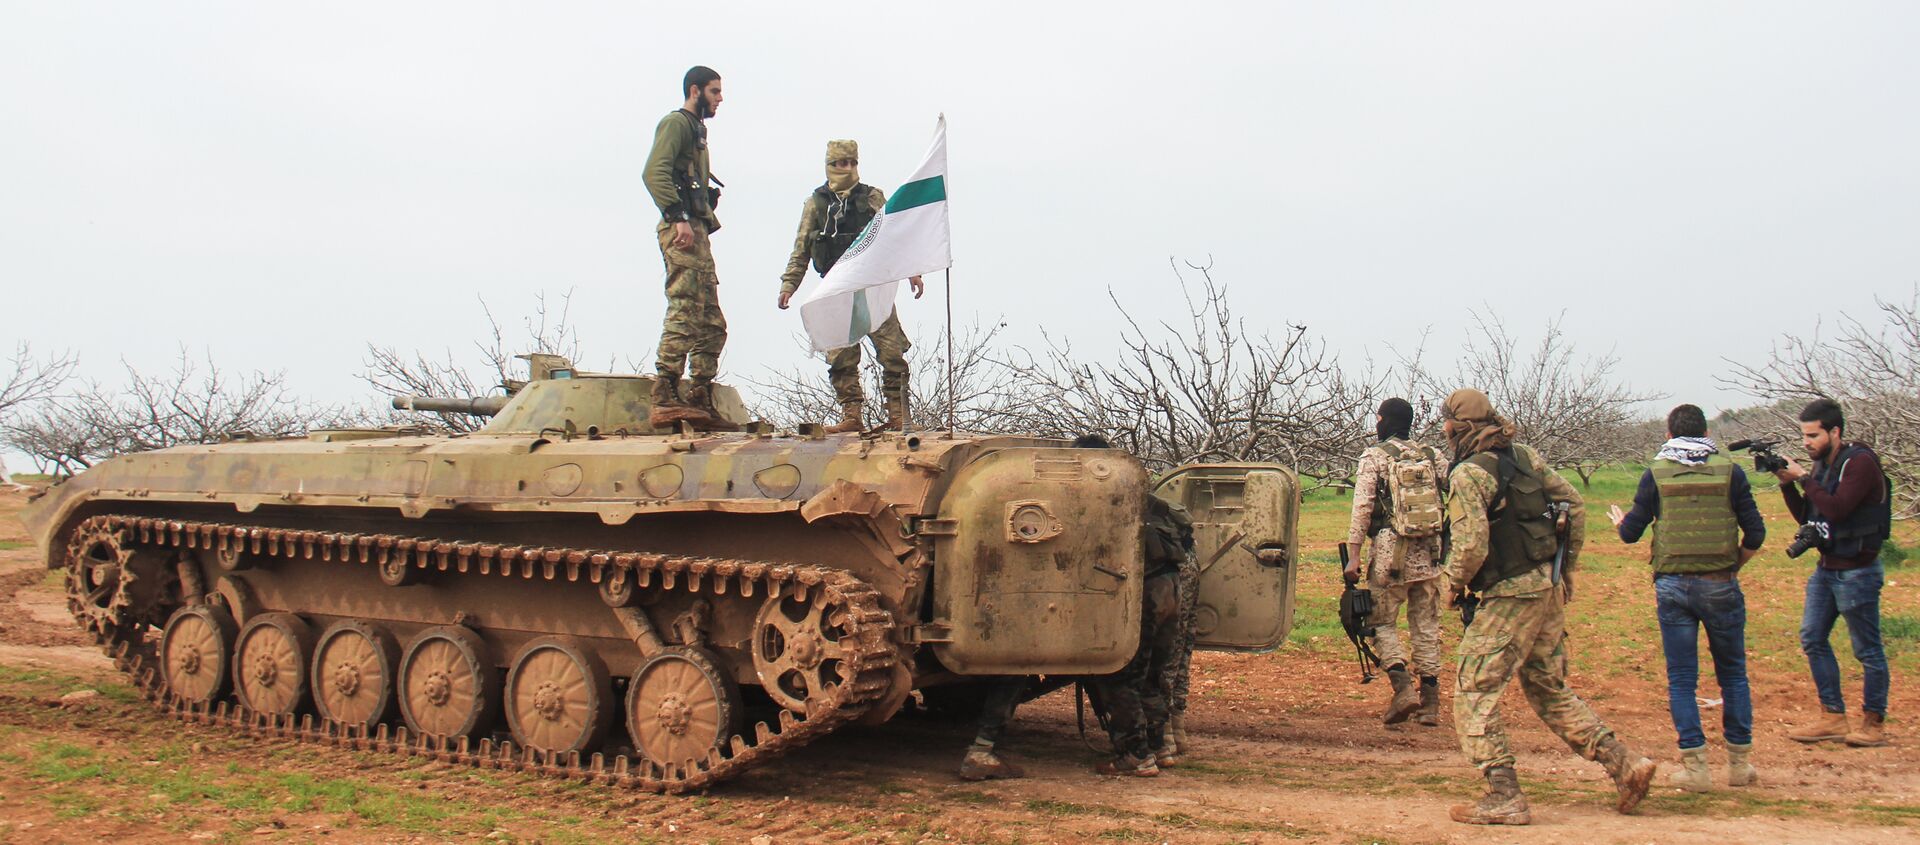 A picture taken on March 22, 2017 near the town of Maardes in the countryside of the central Syrian province of Hama, shows rebel fighters walking past an armoured vehicle carrying the flag of the Tahrir al-Sham rebel alliance - Sputnik International, 1920, 04.04.2021